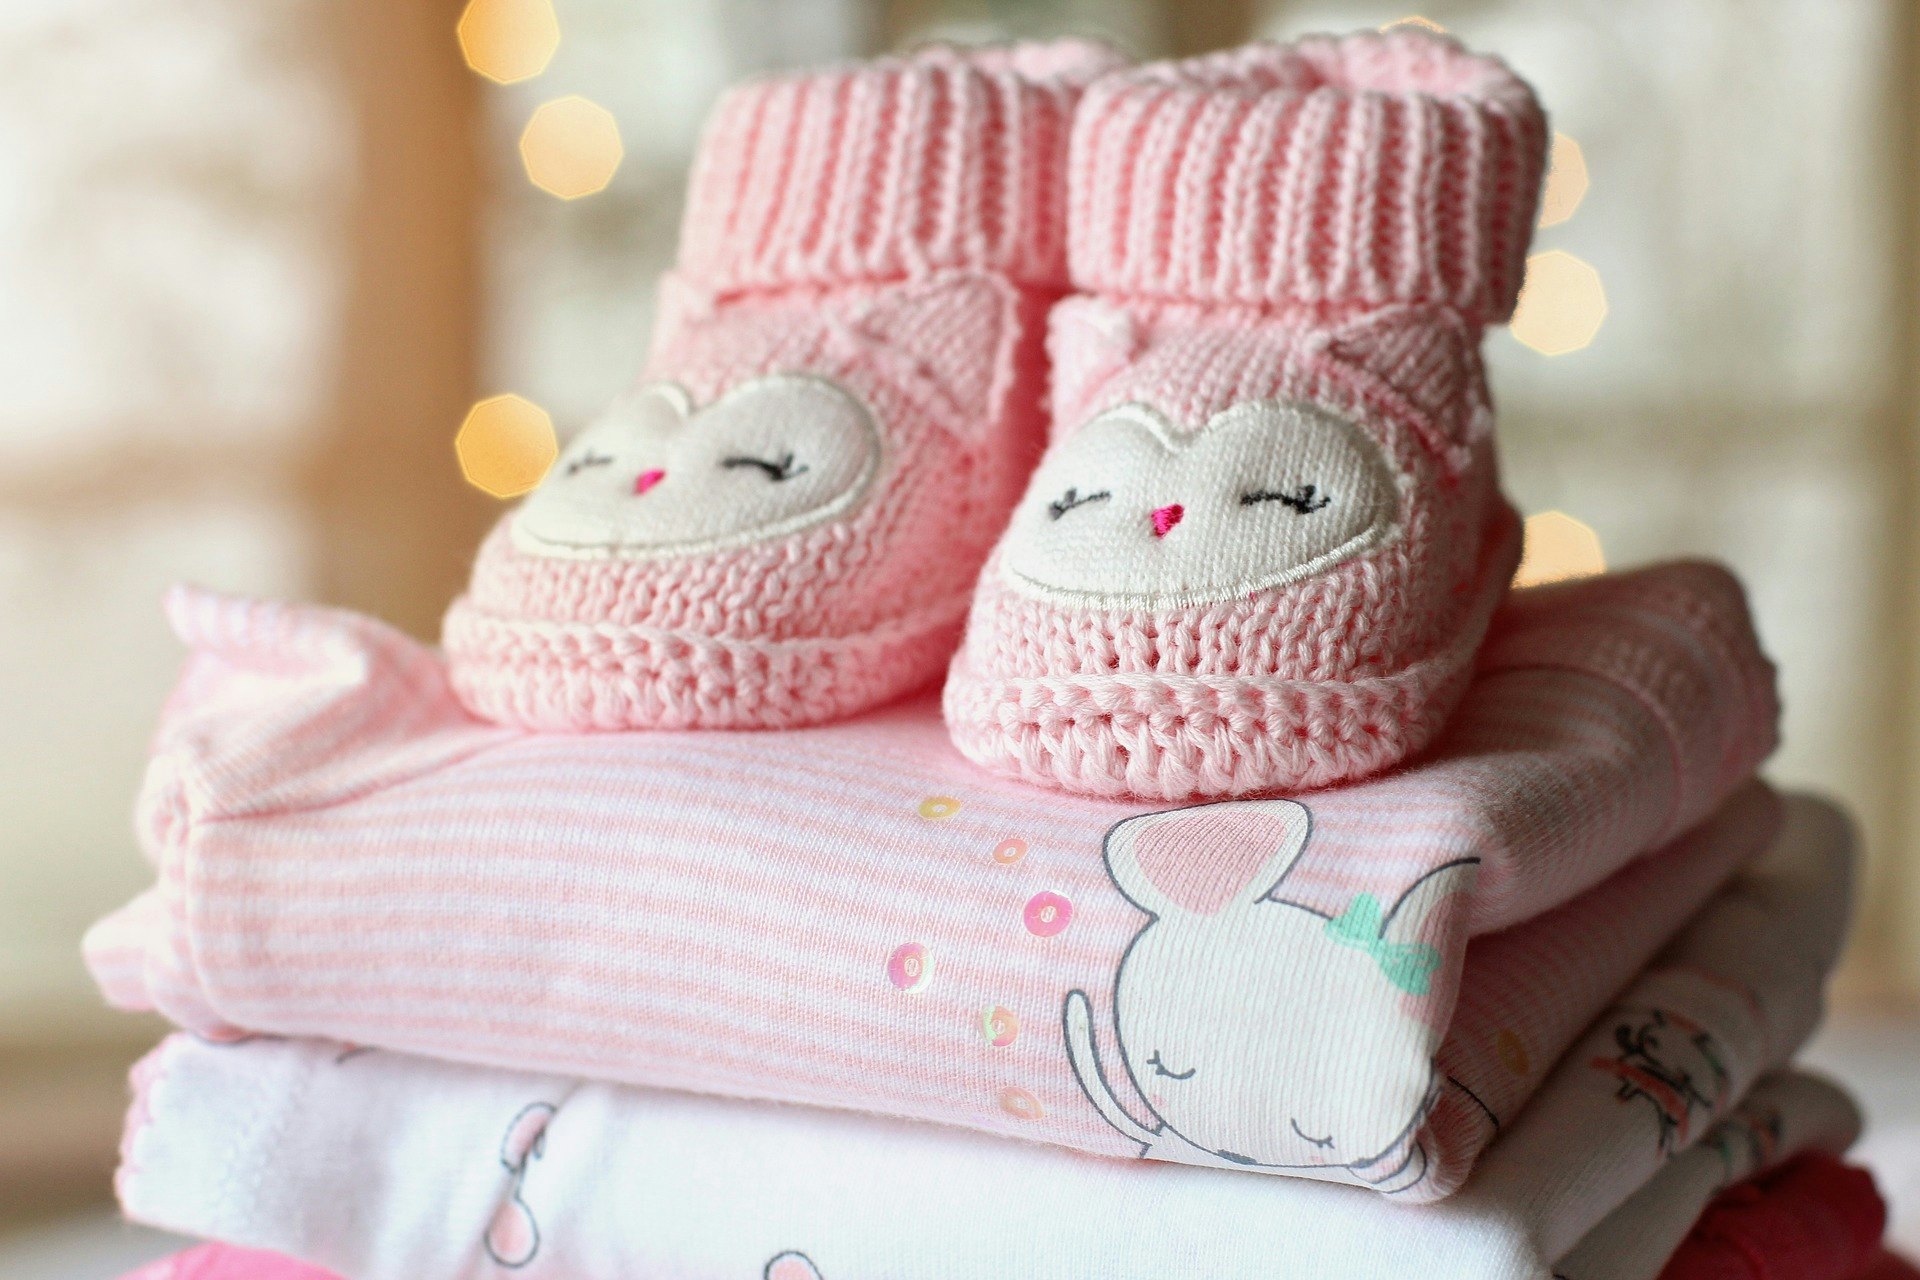 When to Start Buying Baby Stuff, Baby Clothes